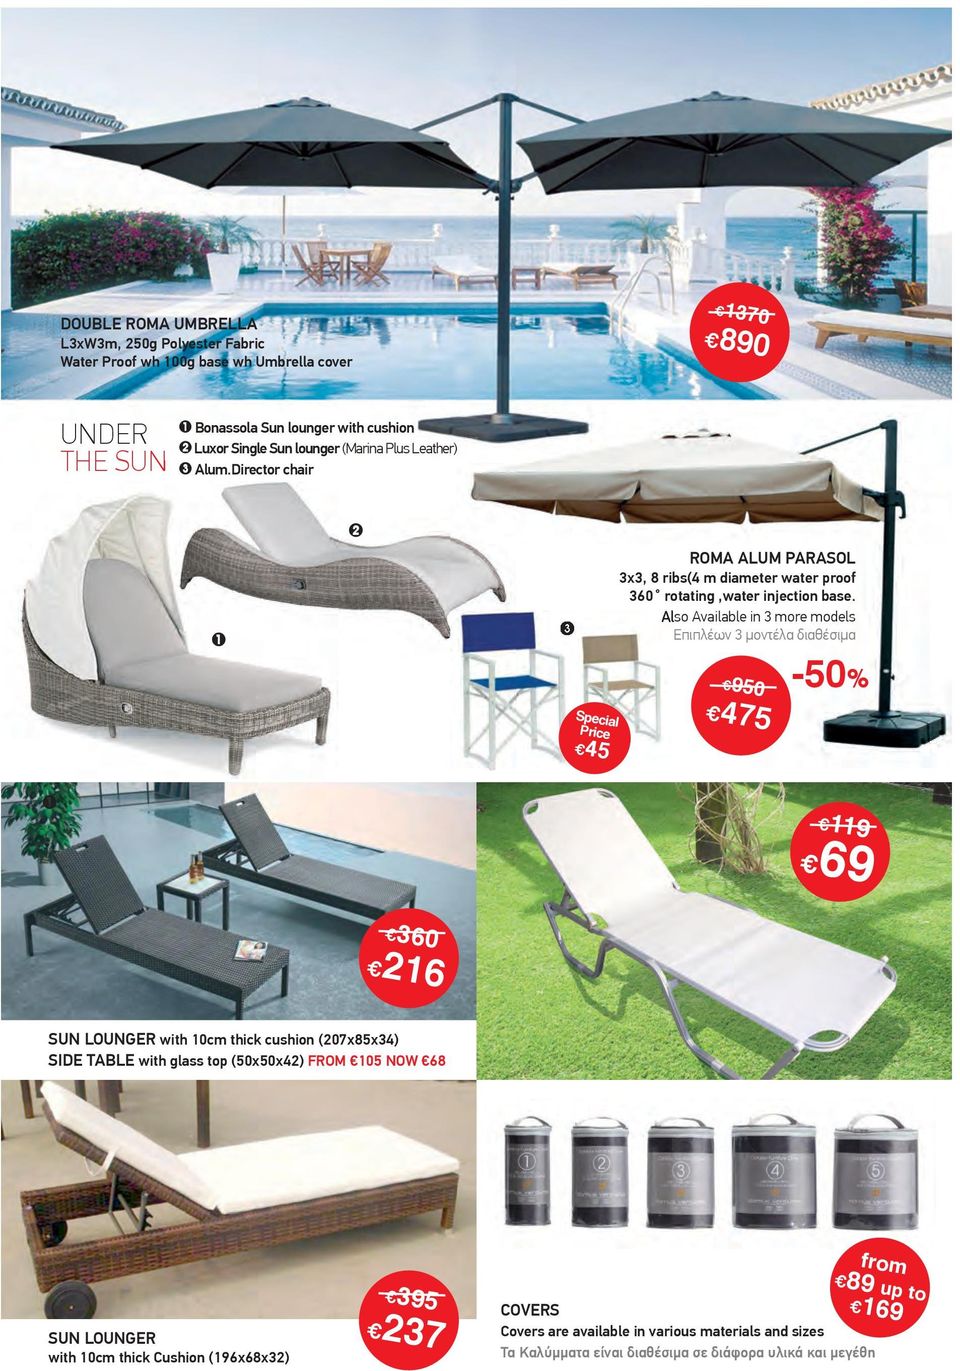 Also Available in more models Επιπλέων μοντέλα διαθέσιμα 950 475-50% 9 69 60 6 SUN LOUNGER with 0cm thick cushion (07x85x4) SIDE TABLE with glass top (50x50x4) FROM 05